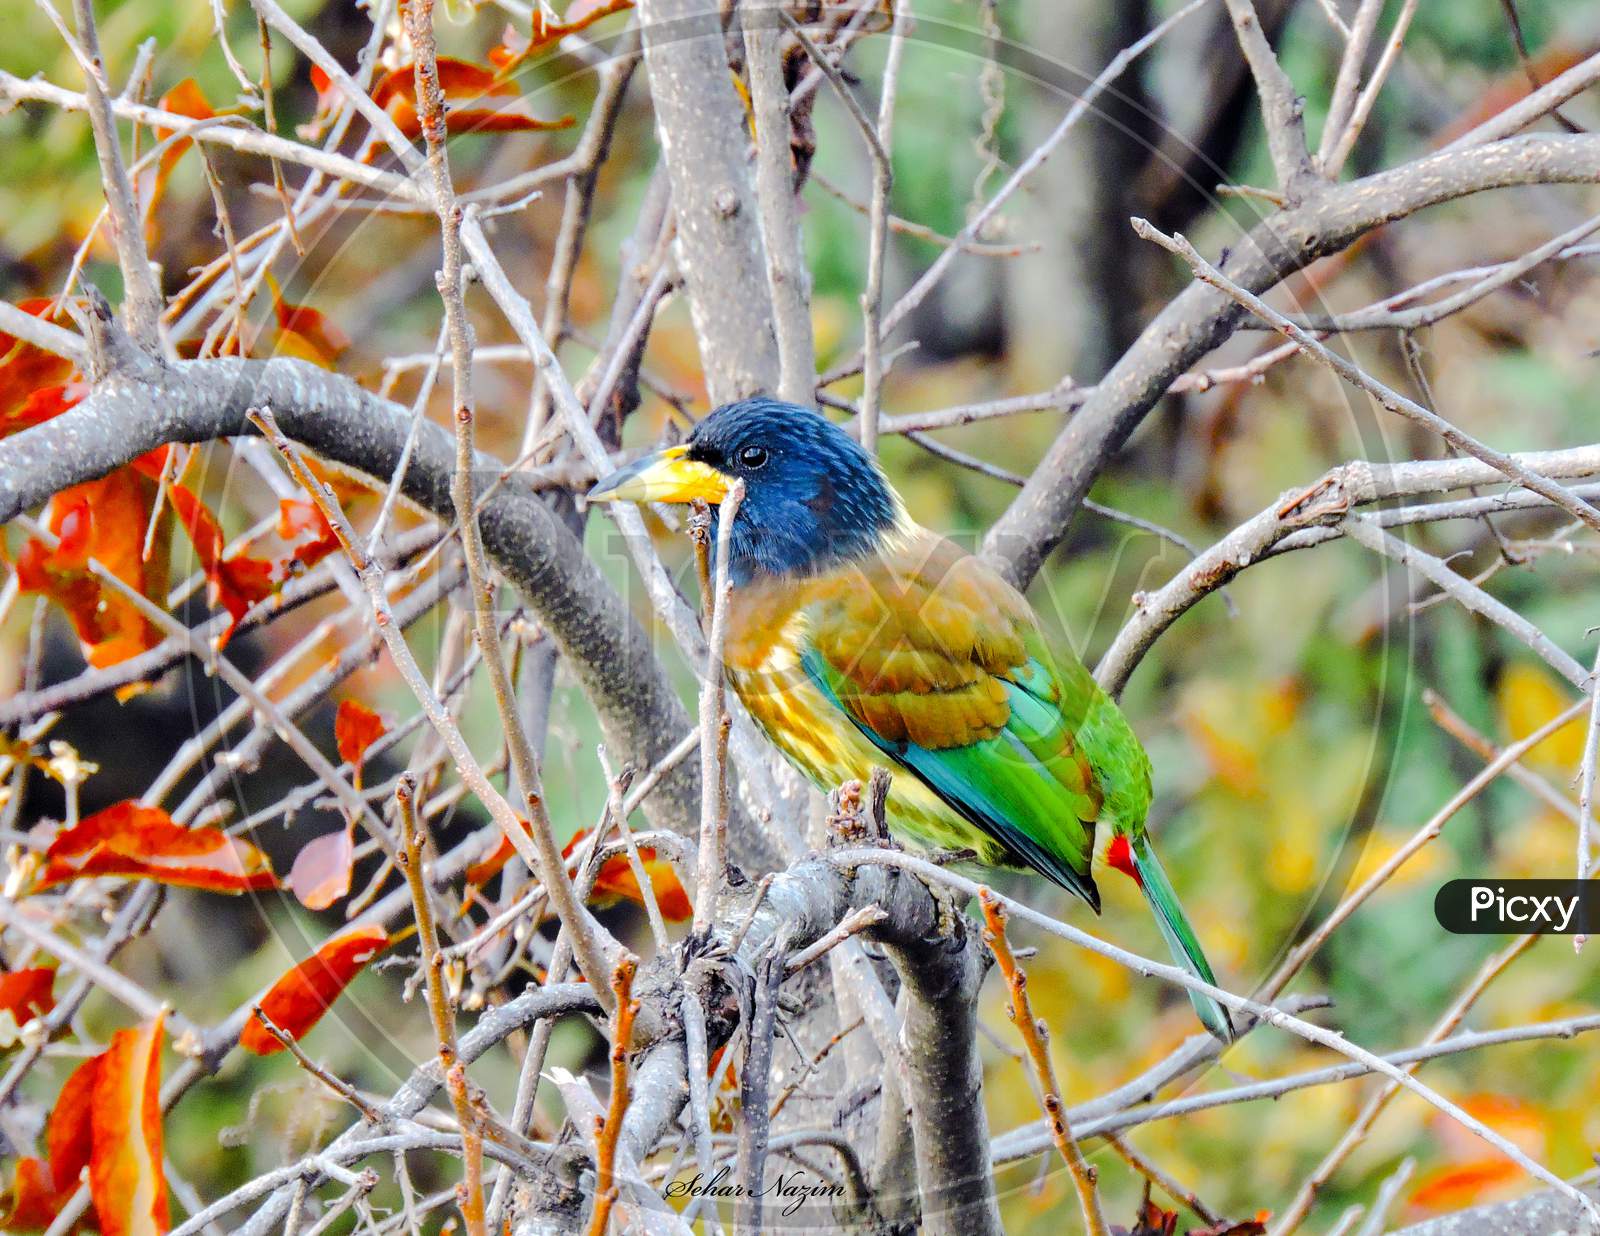 The great Indian Barbet